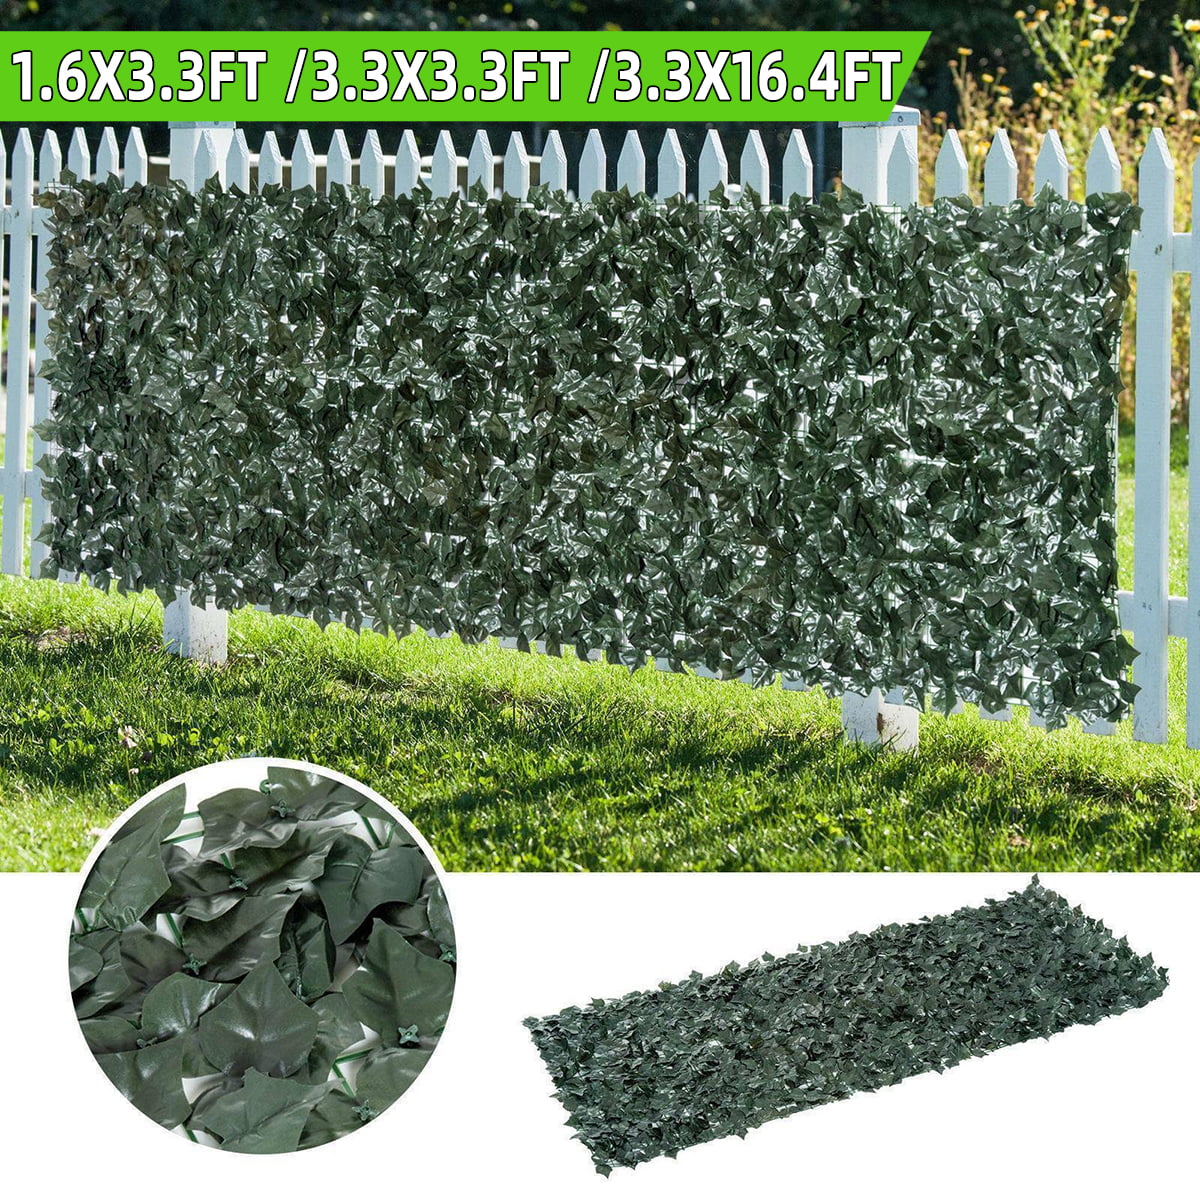 Ivy Hedge Privacy Fence Backyard Pool Deck Patio Artificial Leaf Screen Panels 